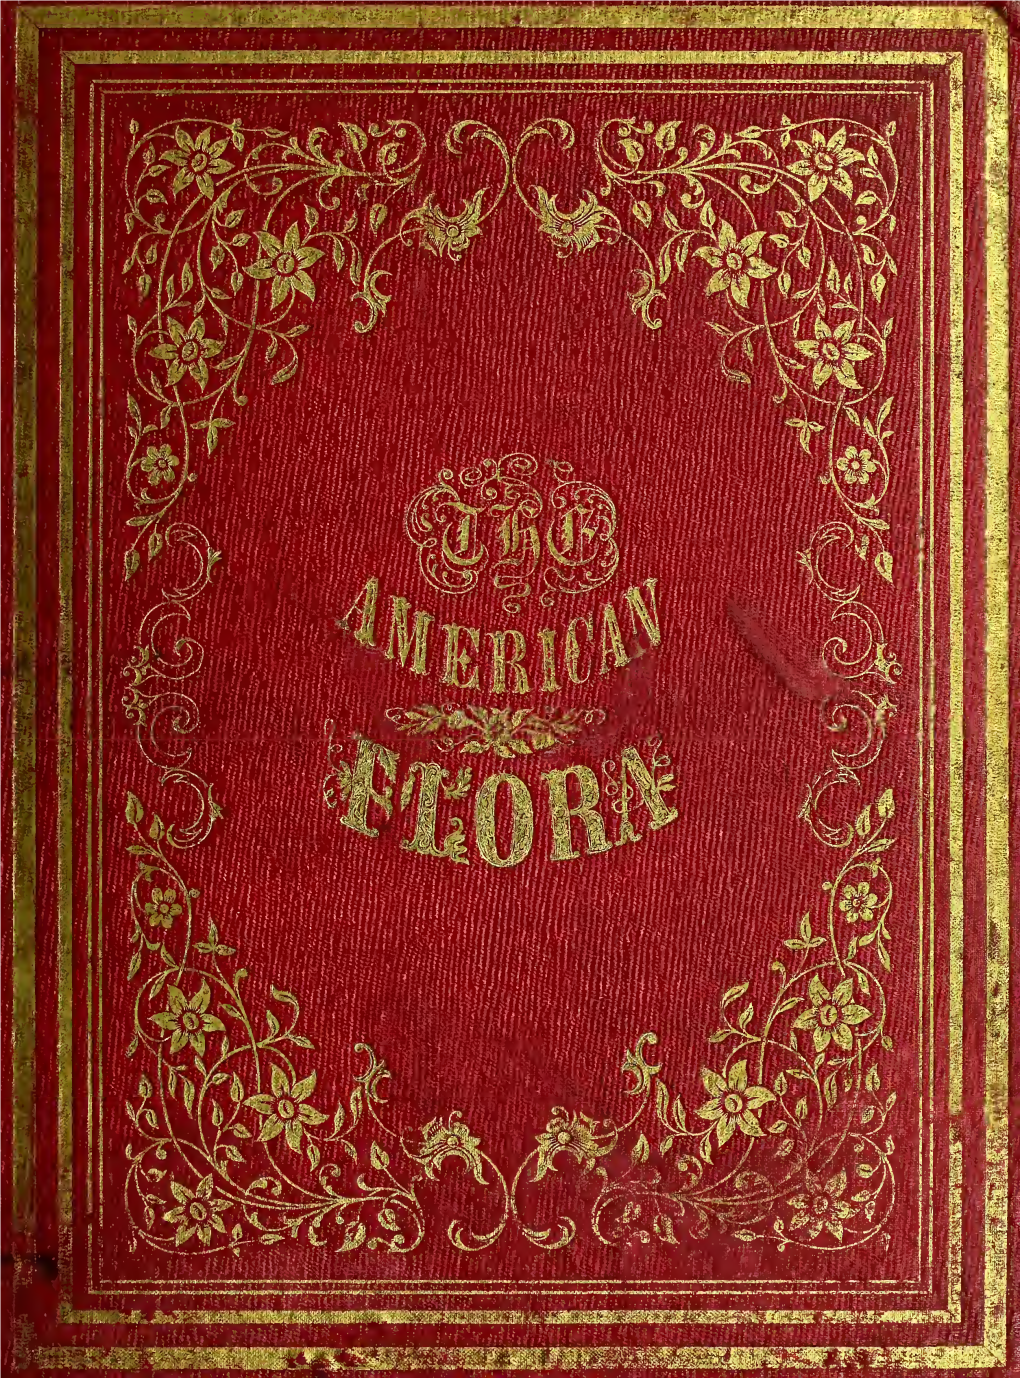 The American Flora, Or, History of Plants and Wild Flowers